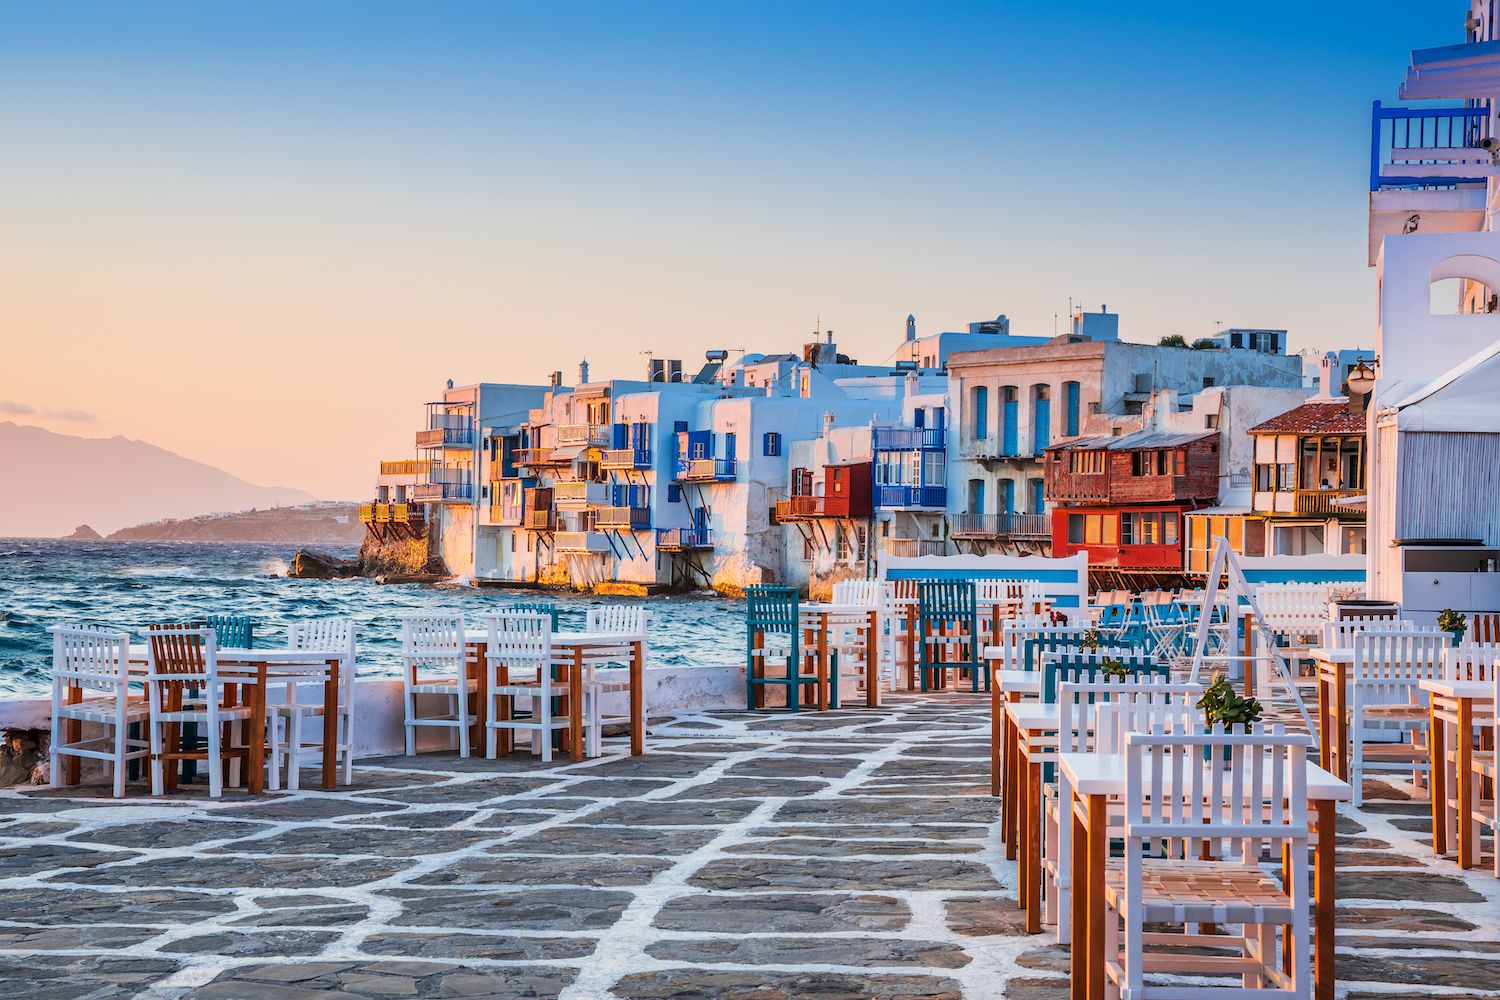 Planning Greece Holidays? Check out our Greece tour first!!